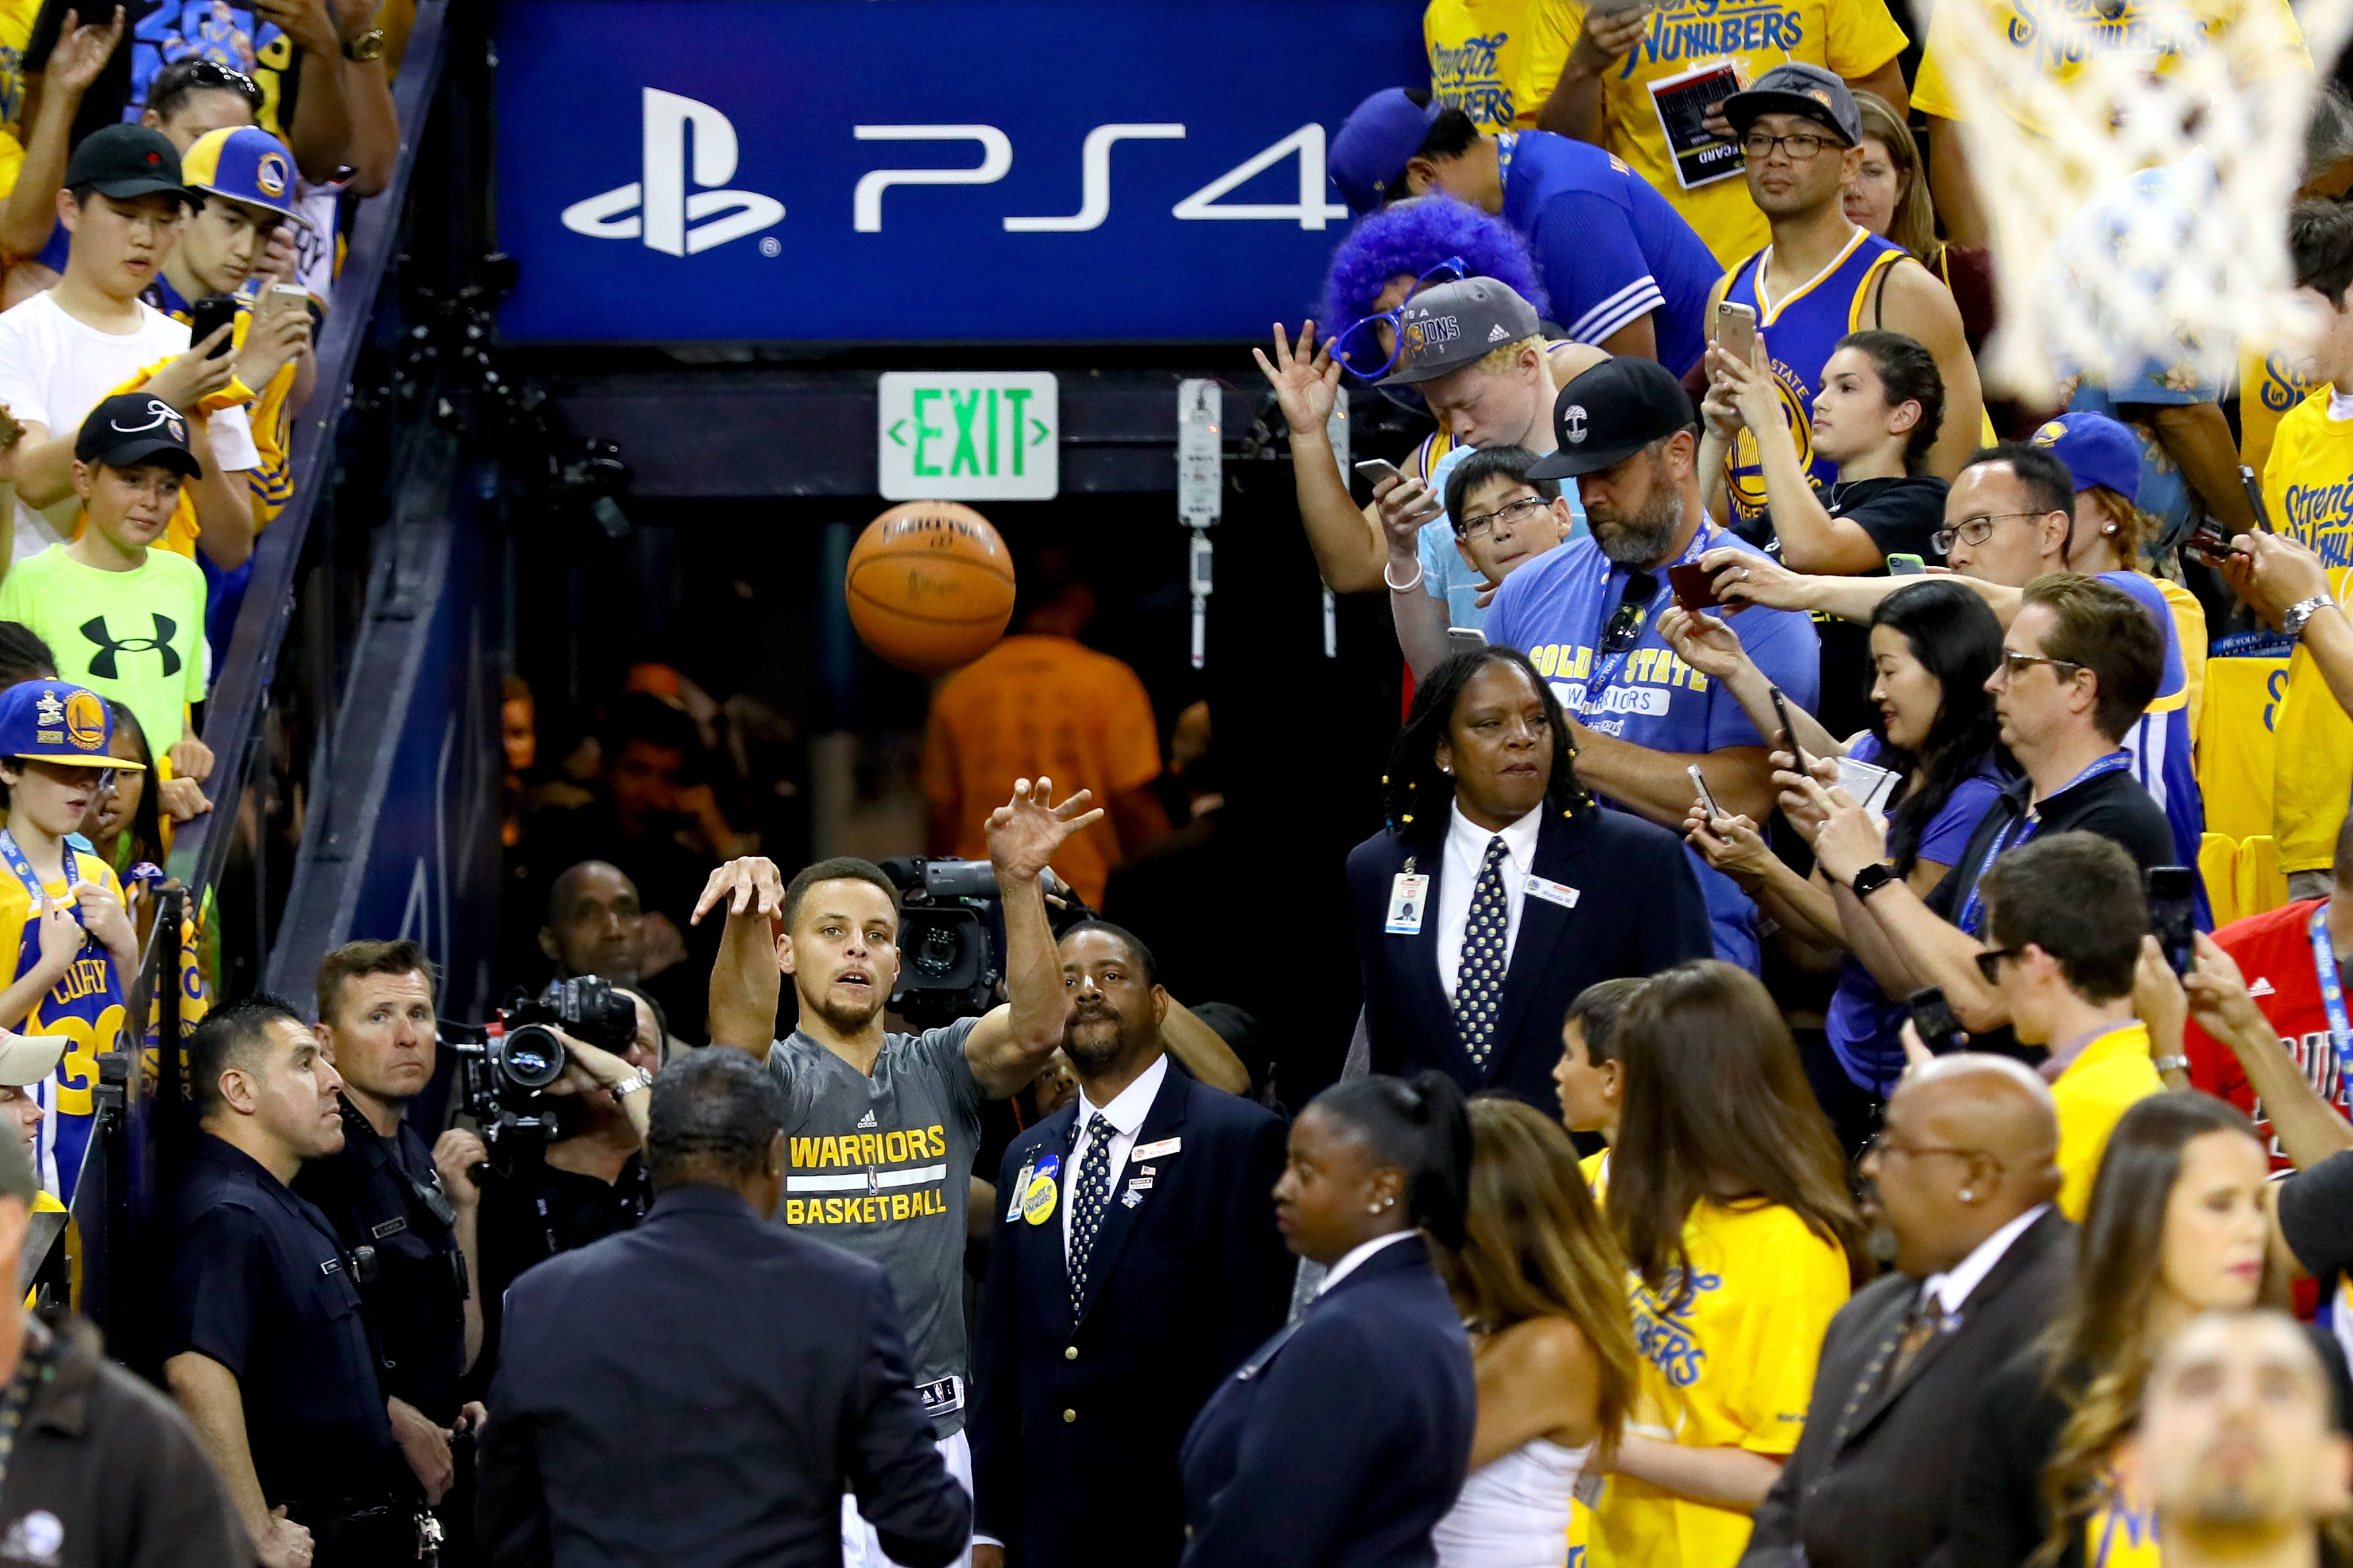 OAKLAND, CA - JUNE 19: Stephen Curry #30 of the Golden State Warriors shoots a shot from the tunnel and makes his first attempt before taking on the Cleveland Cavaliers in Game 7 of the 2016 NBA Finals at ORACLE Arena on June 19, 2016 in Oakland, California. NOTE TO USER: User expressly acknowledges and agrees that, by downloading and or using this photograph, User is consenting to the terms and conditions of the Getty Images License Agreement.   Ezra Shaw/Getty Images/AFP